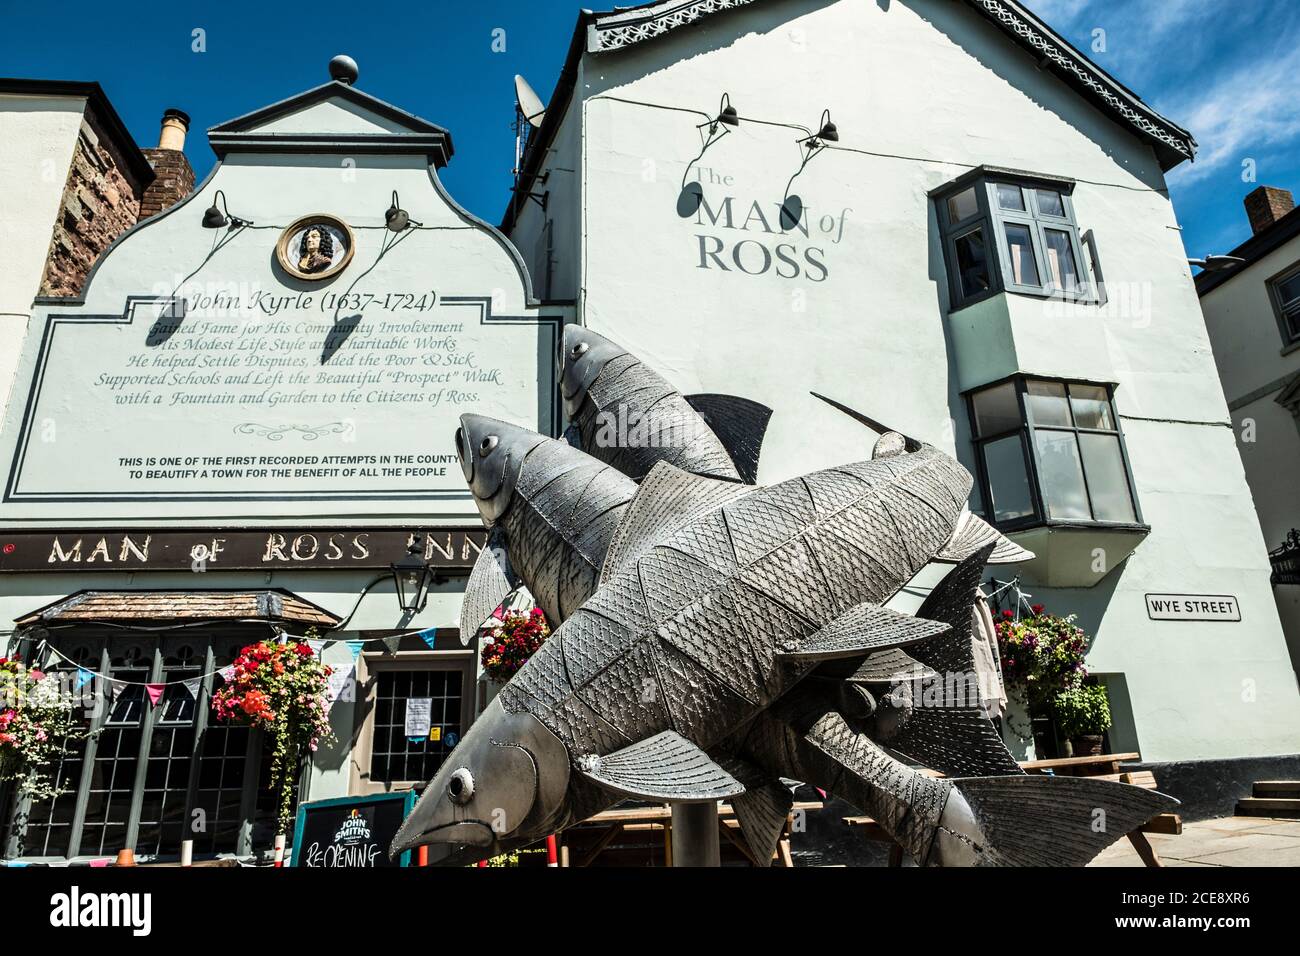 A sculpture of leaping salmon outside the Man of Ross Inn. Stock Photo